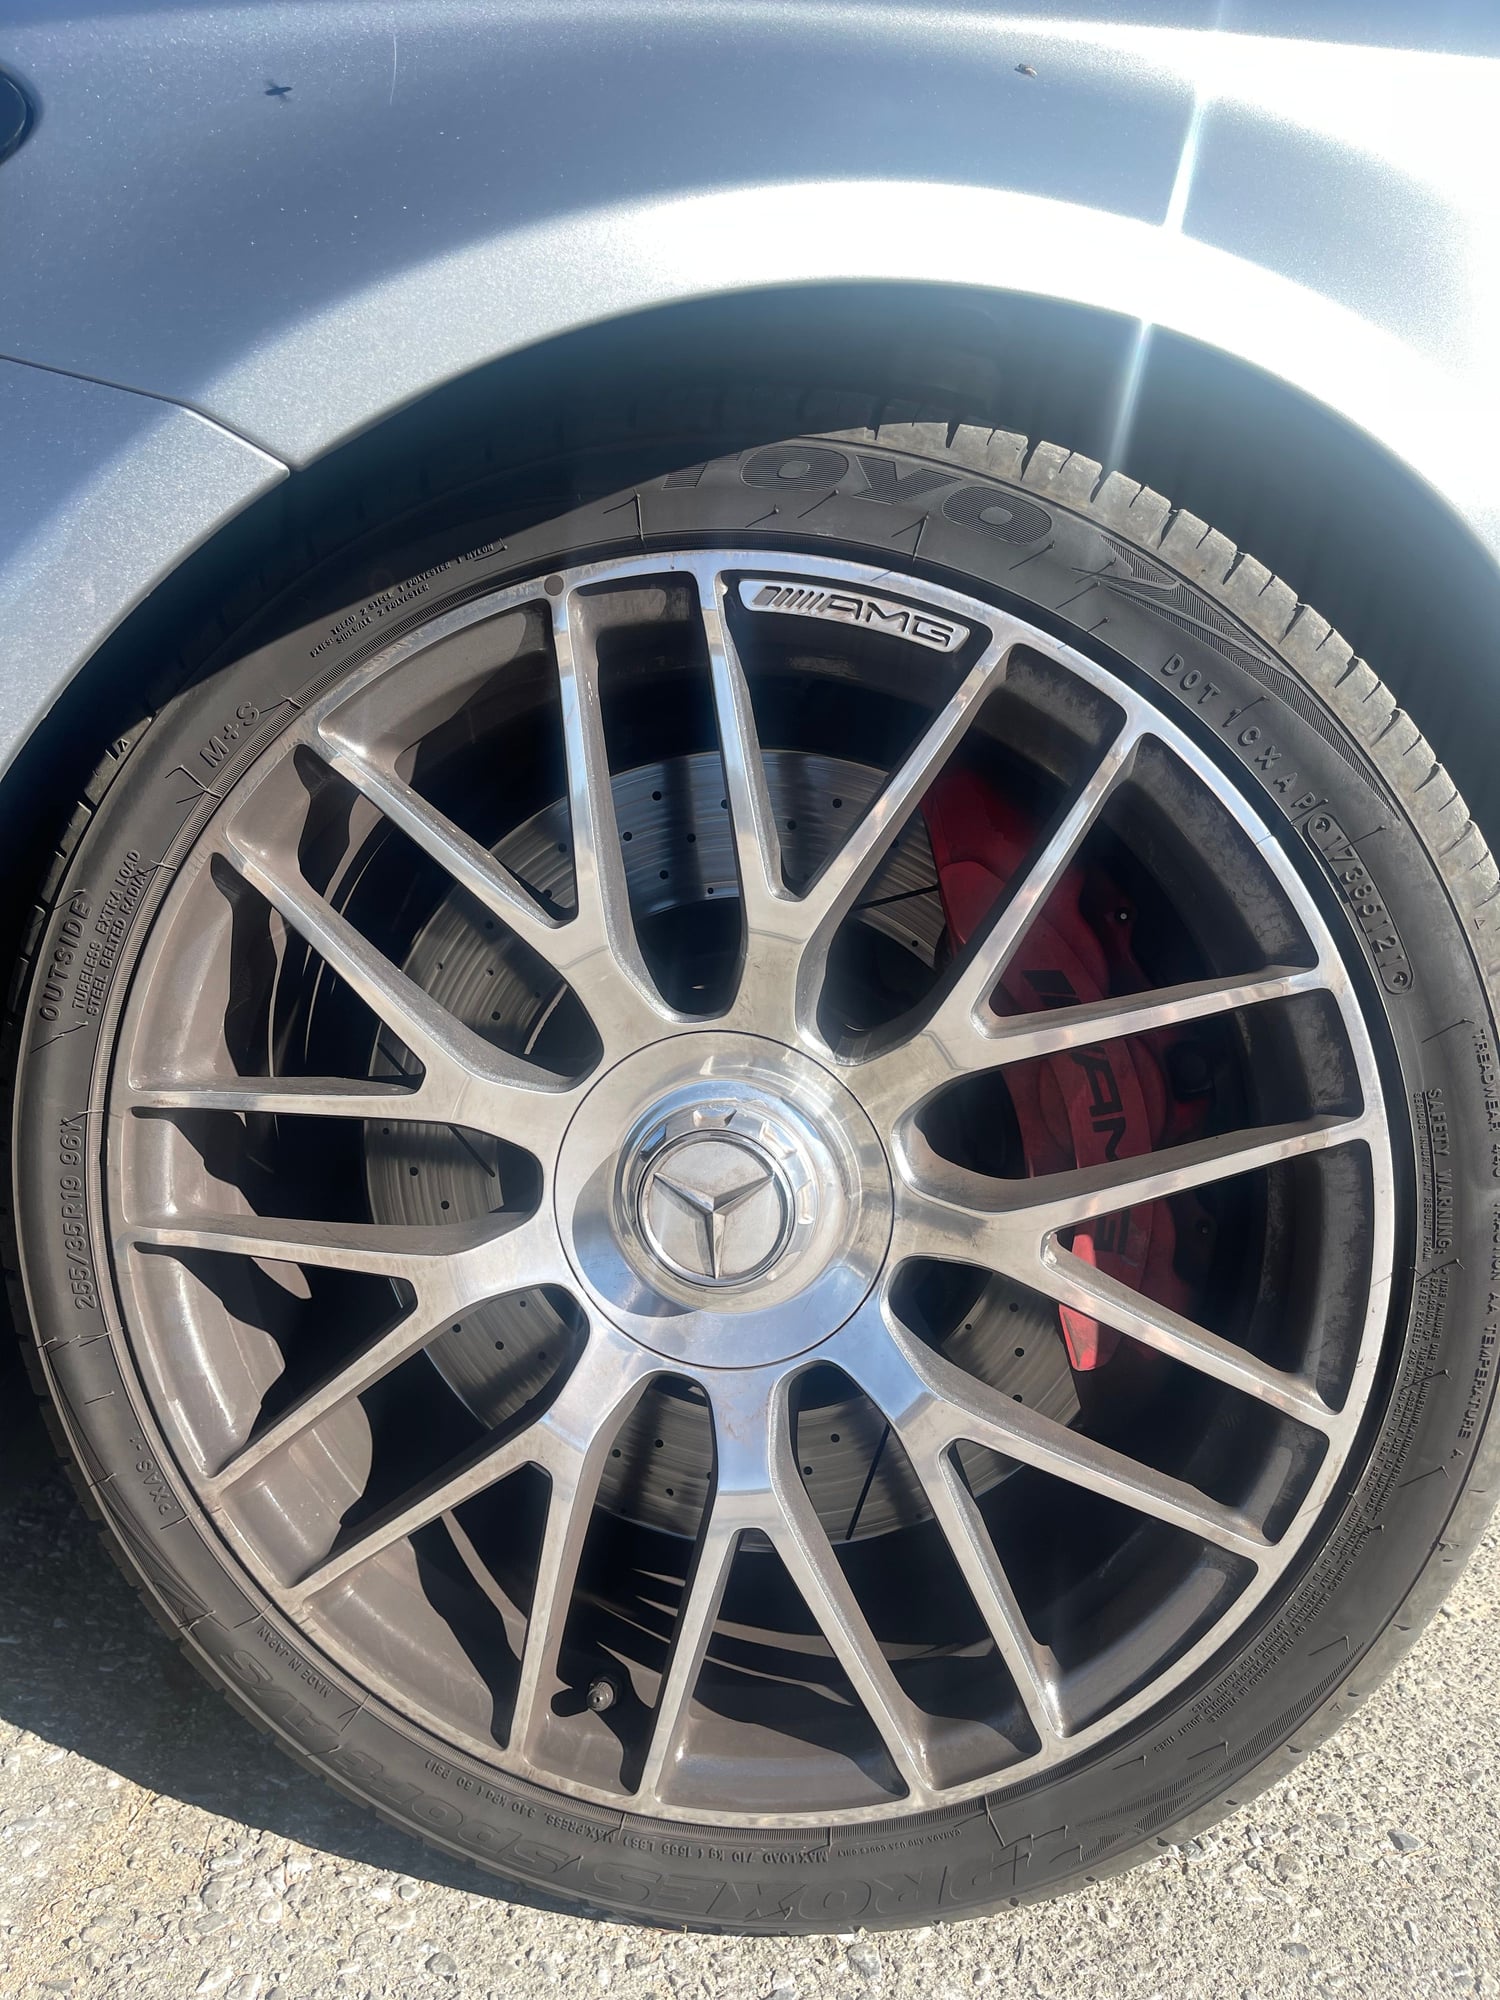 Wheels and Tires/Axles - 2016 AMG C63S OEM WHEELS - Used - 2016 to 2019 Mercedes-Benz C63 AMG S - Phelan, CA 92371, United States